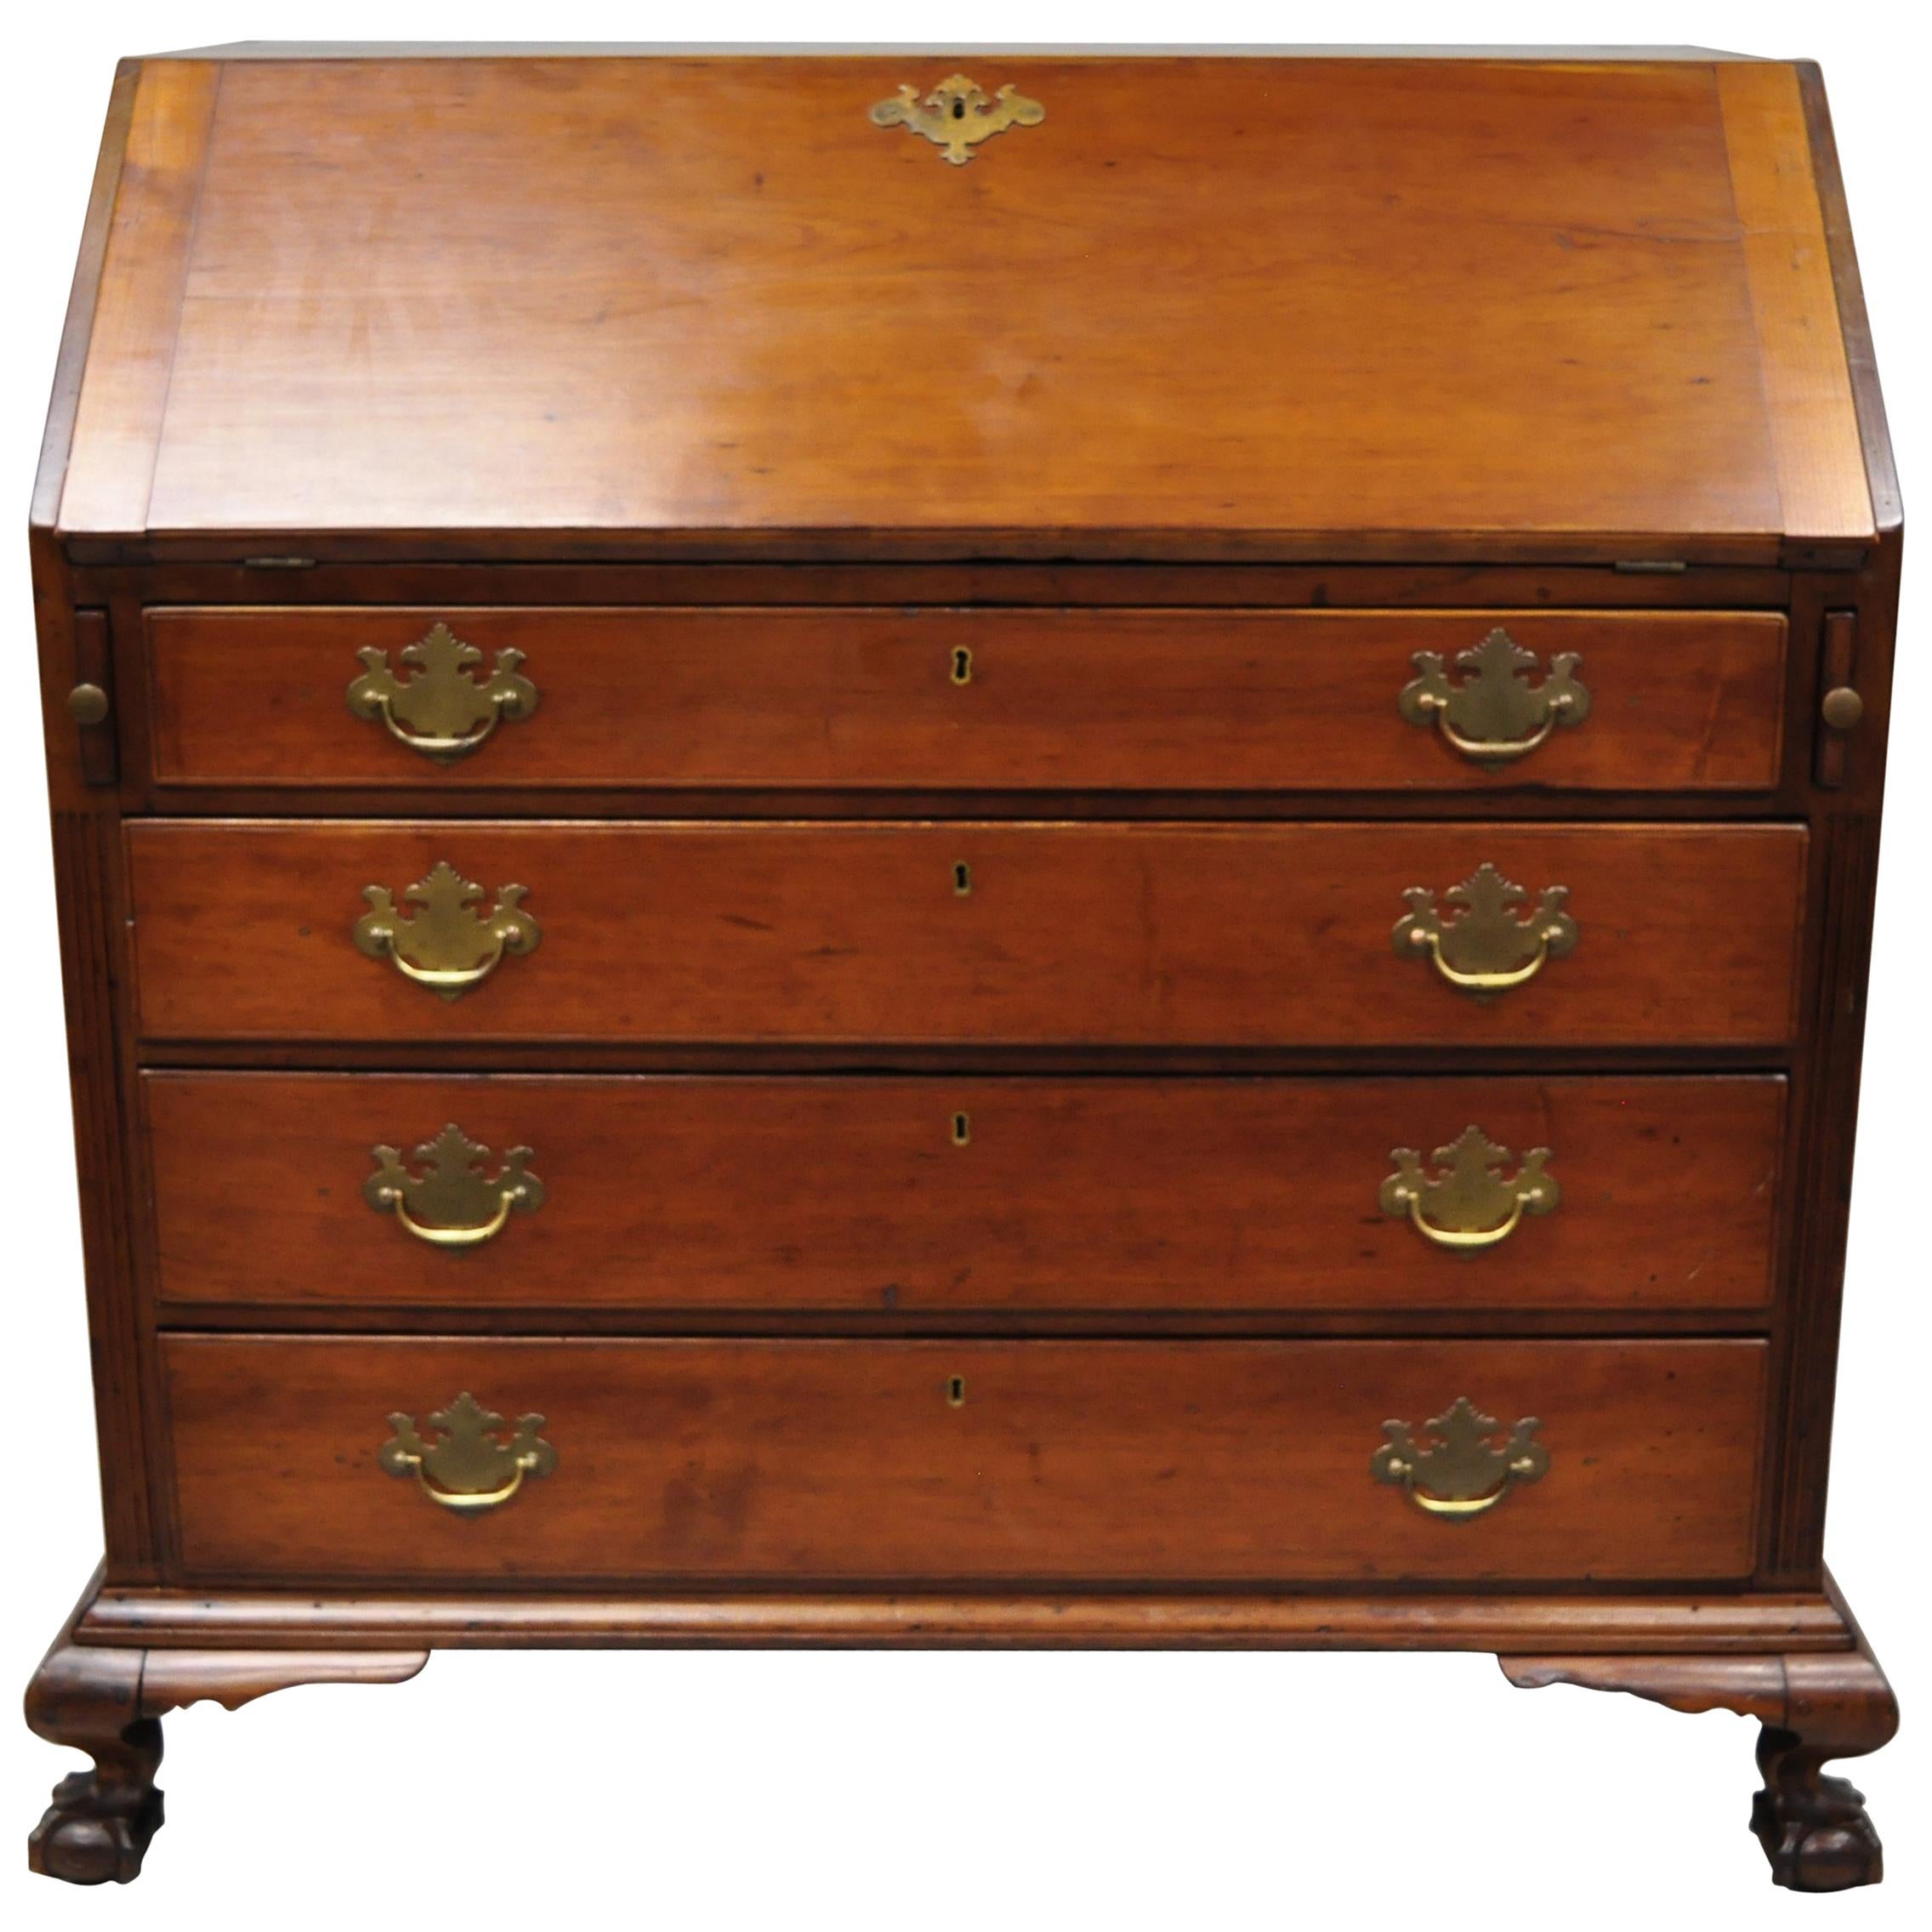 19th Century Mahogany Slant Top Carved Ball and Claw Chippendale Style Desk For Sale